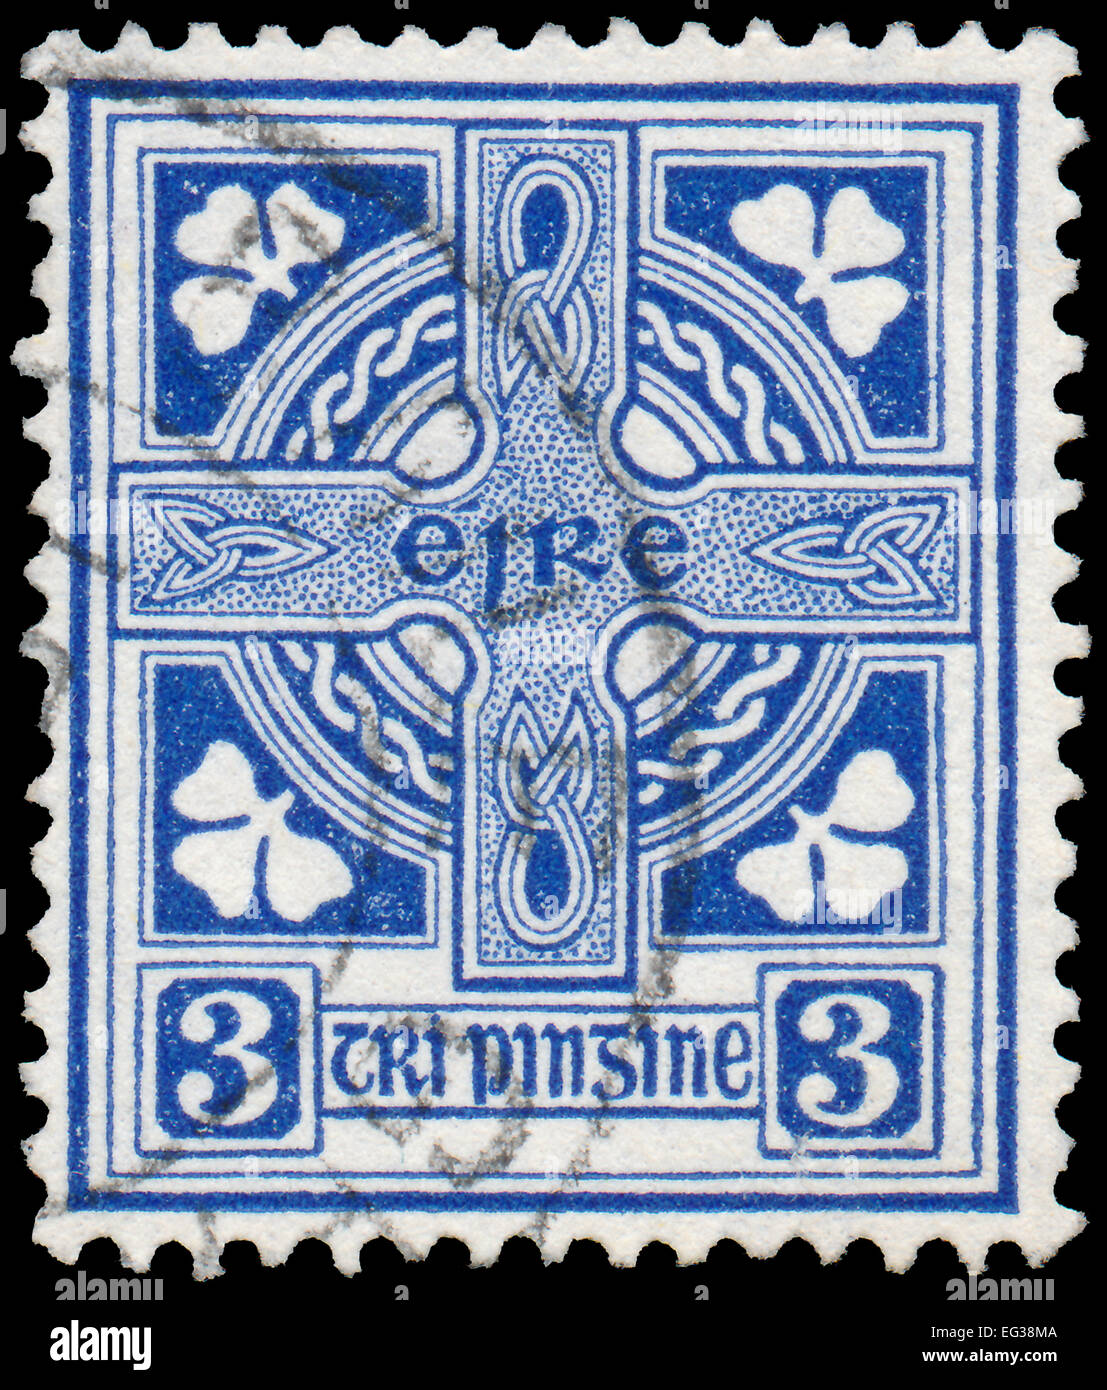 IRELAND-CIRCA 1922: A stamp printed in Ireland shows image of Celtic cross is a symbol that combines a cross with a ring surroun Stock Photo